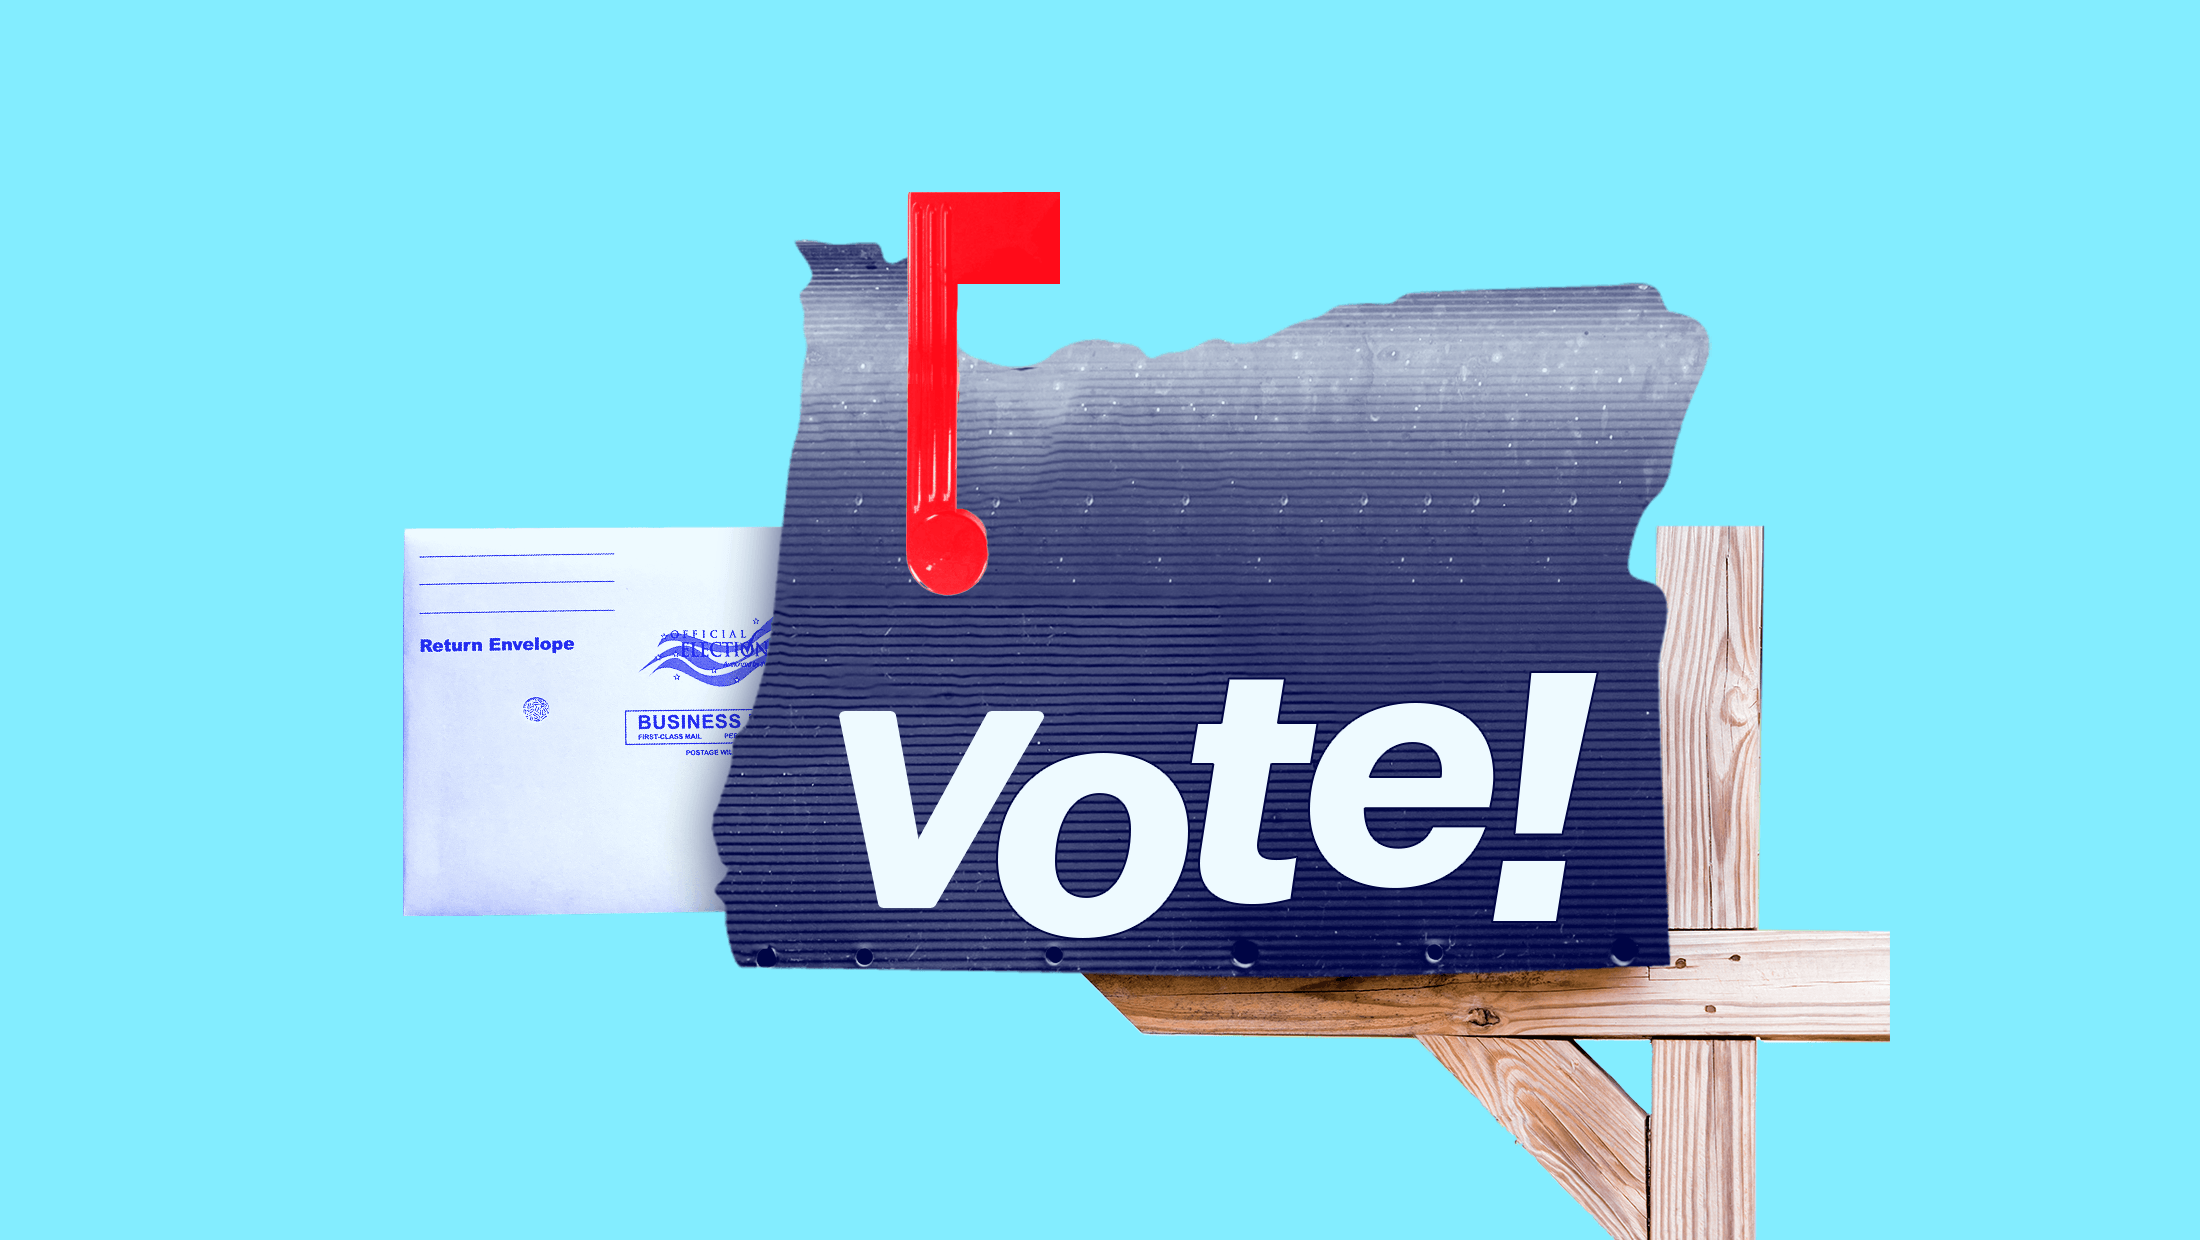 A Oregon-shaped mailbox that says "VOTE" with an absentee ballot return envelope waiting to be picked up by the USPS